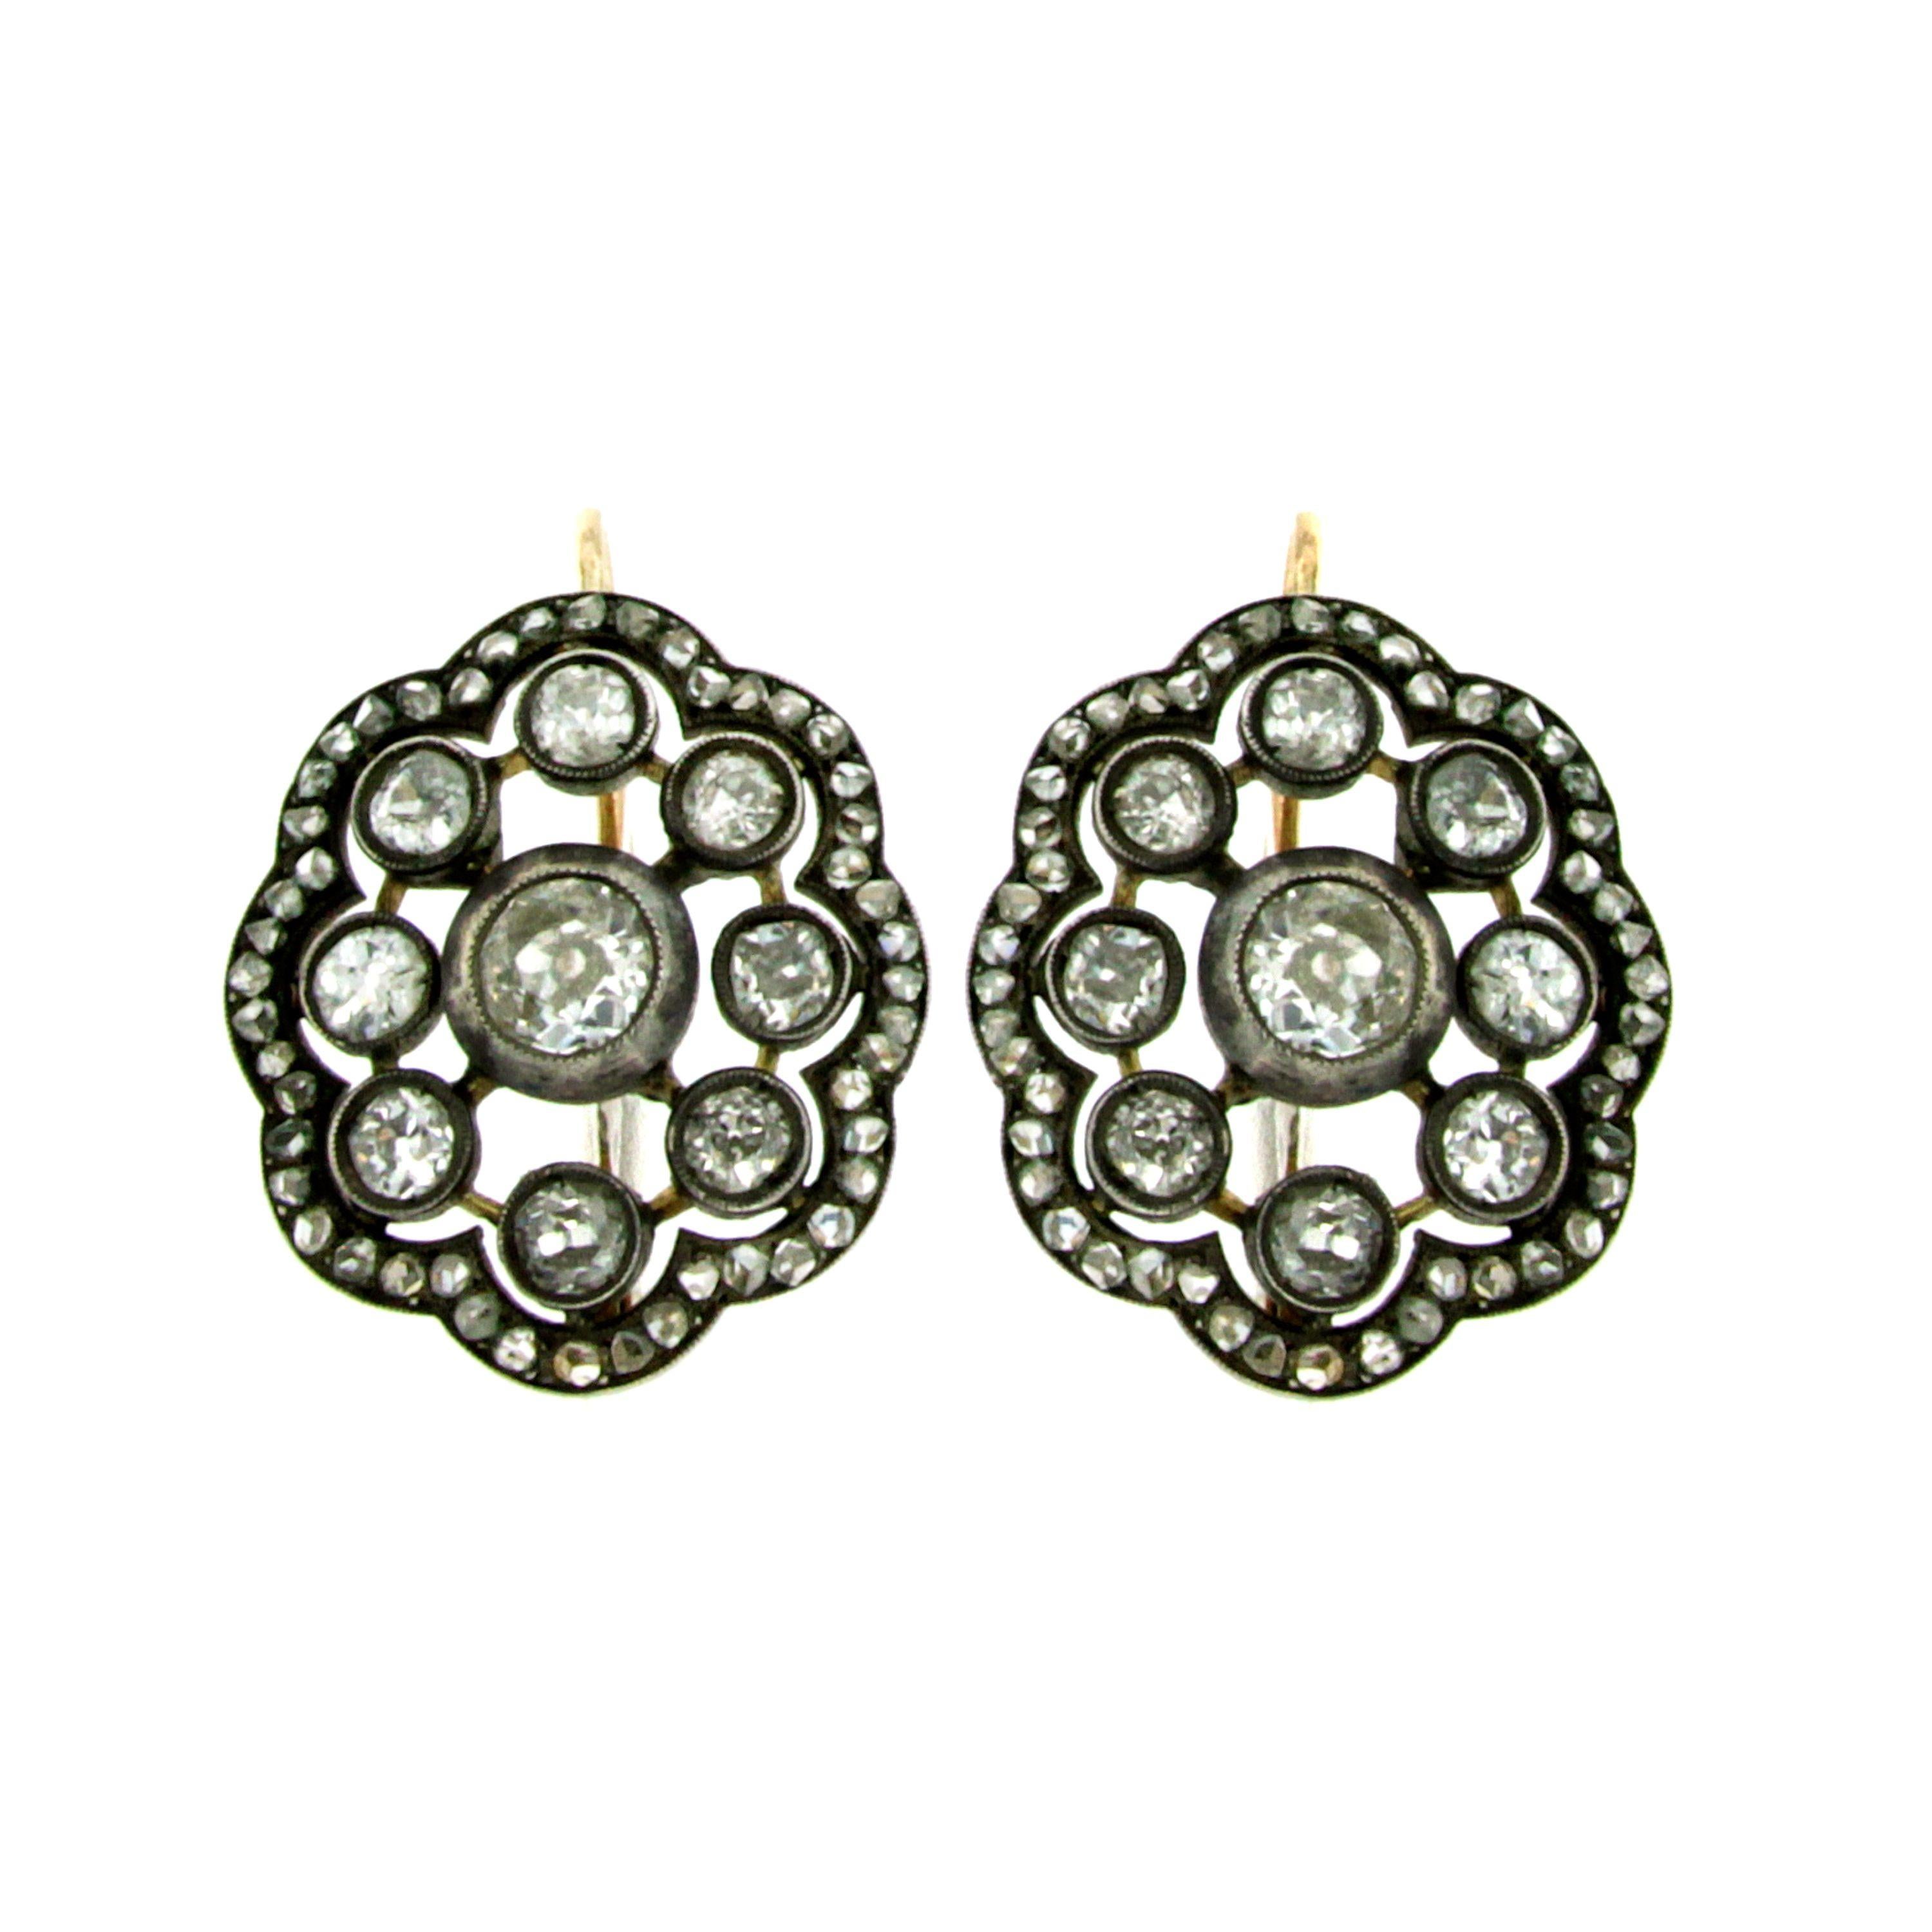 Stunning unusual antique cluster earrings, in excellent conditions.
They are hand crafted in 18k yellow gold and silver, set with 500 carats of Sparkling and Large Old mine cut Diamonds, graded H/I/J color Vs clarity, origin Europe

CONDITION: